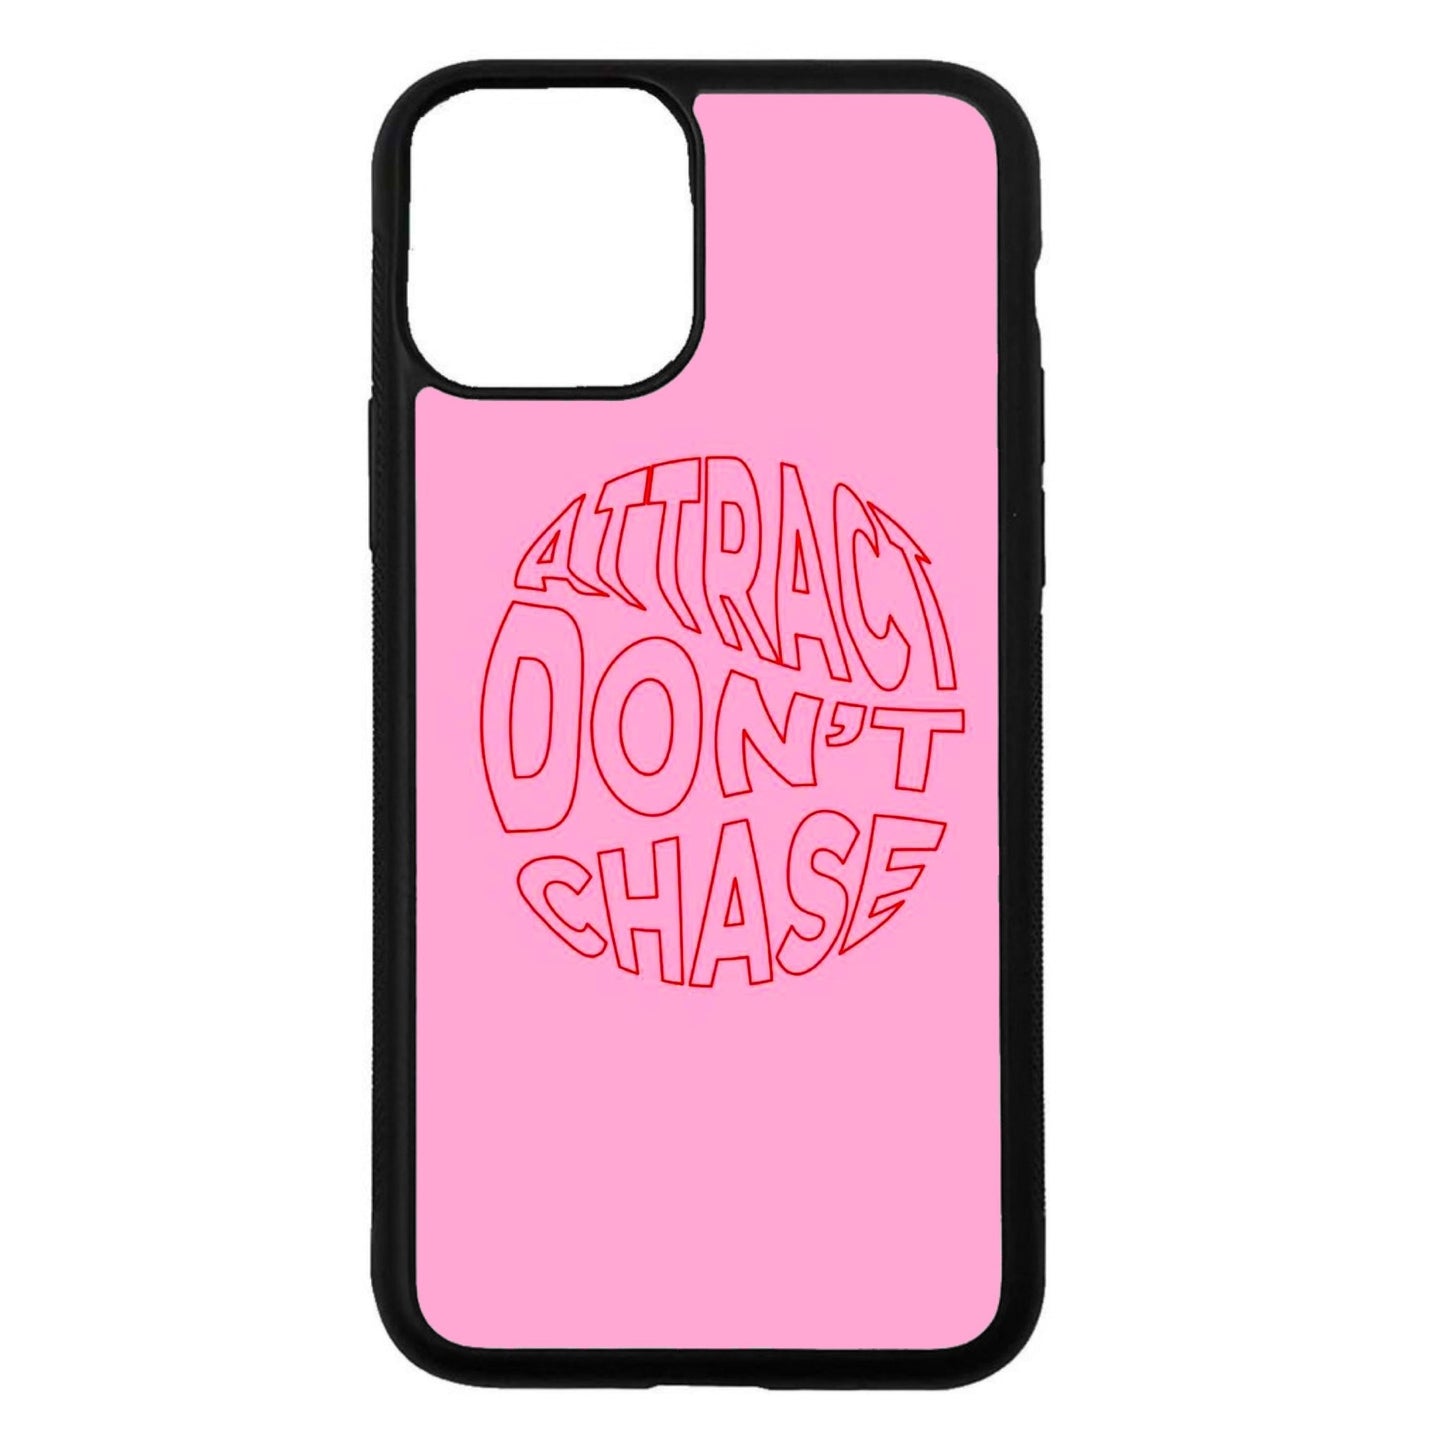 attract don't chase - MAI CASES